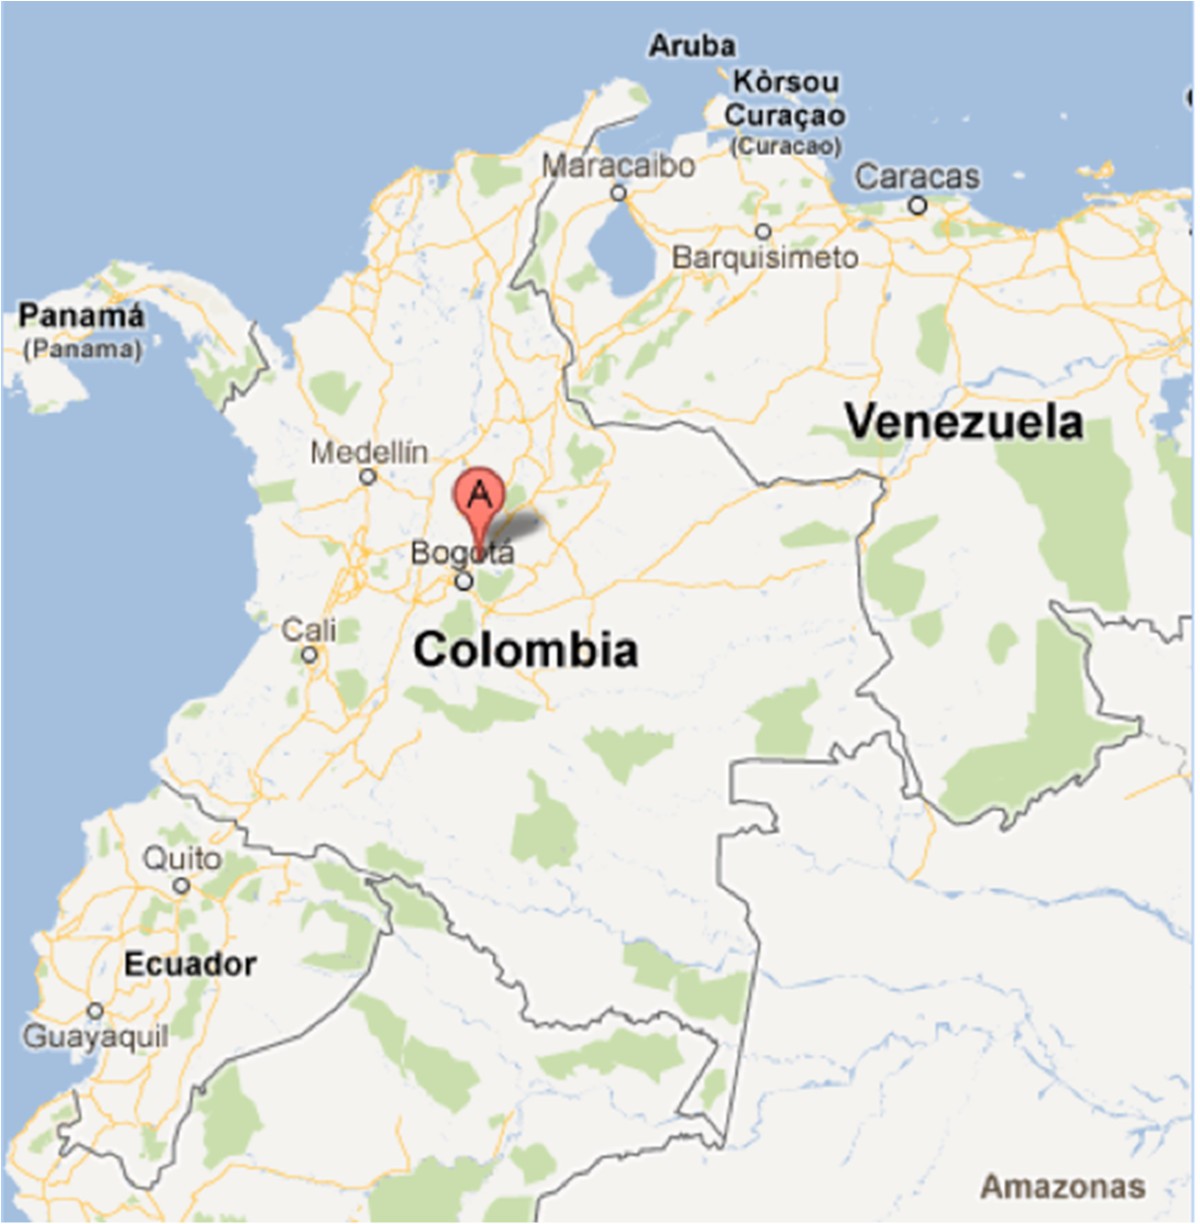 database of the armed conflict in colombia,